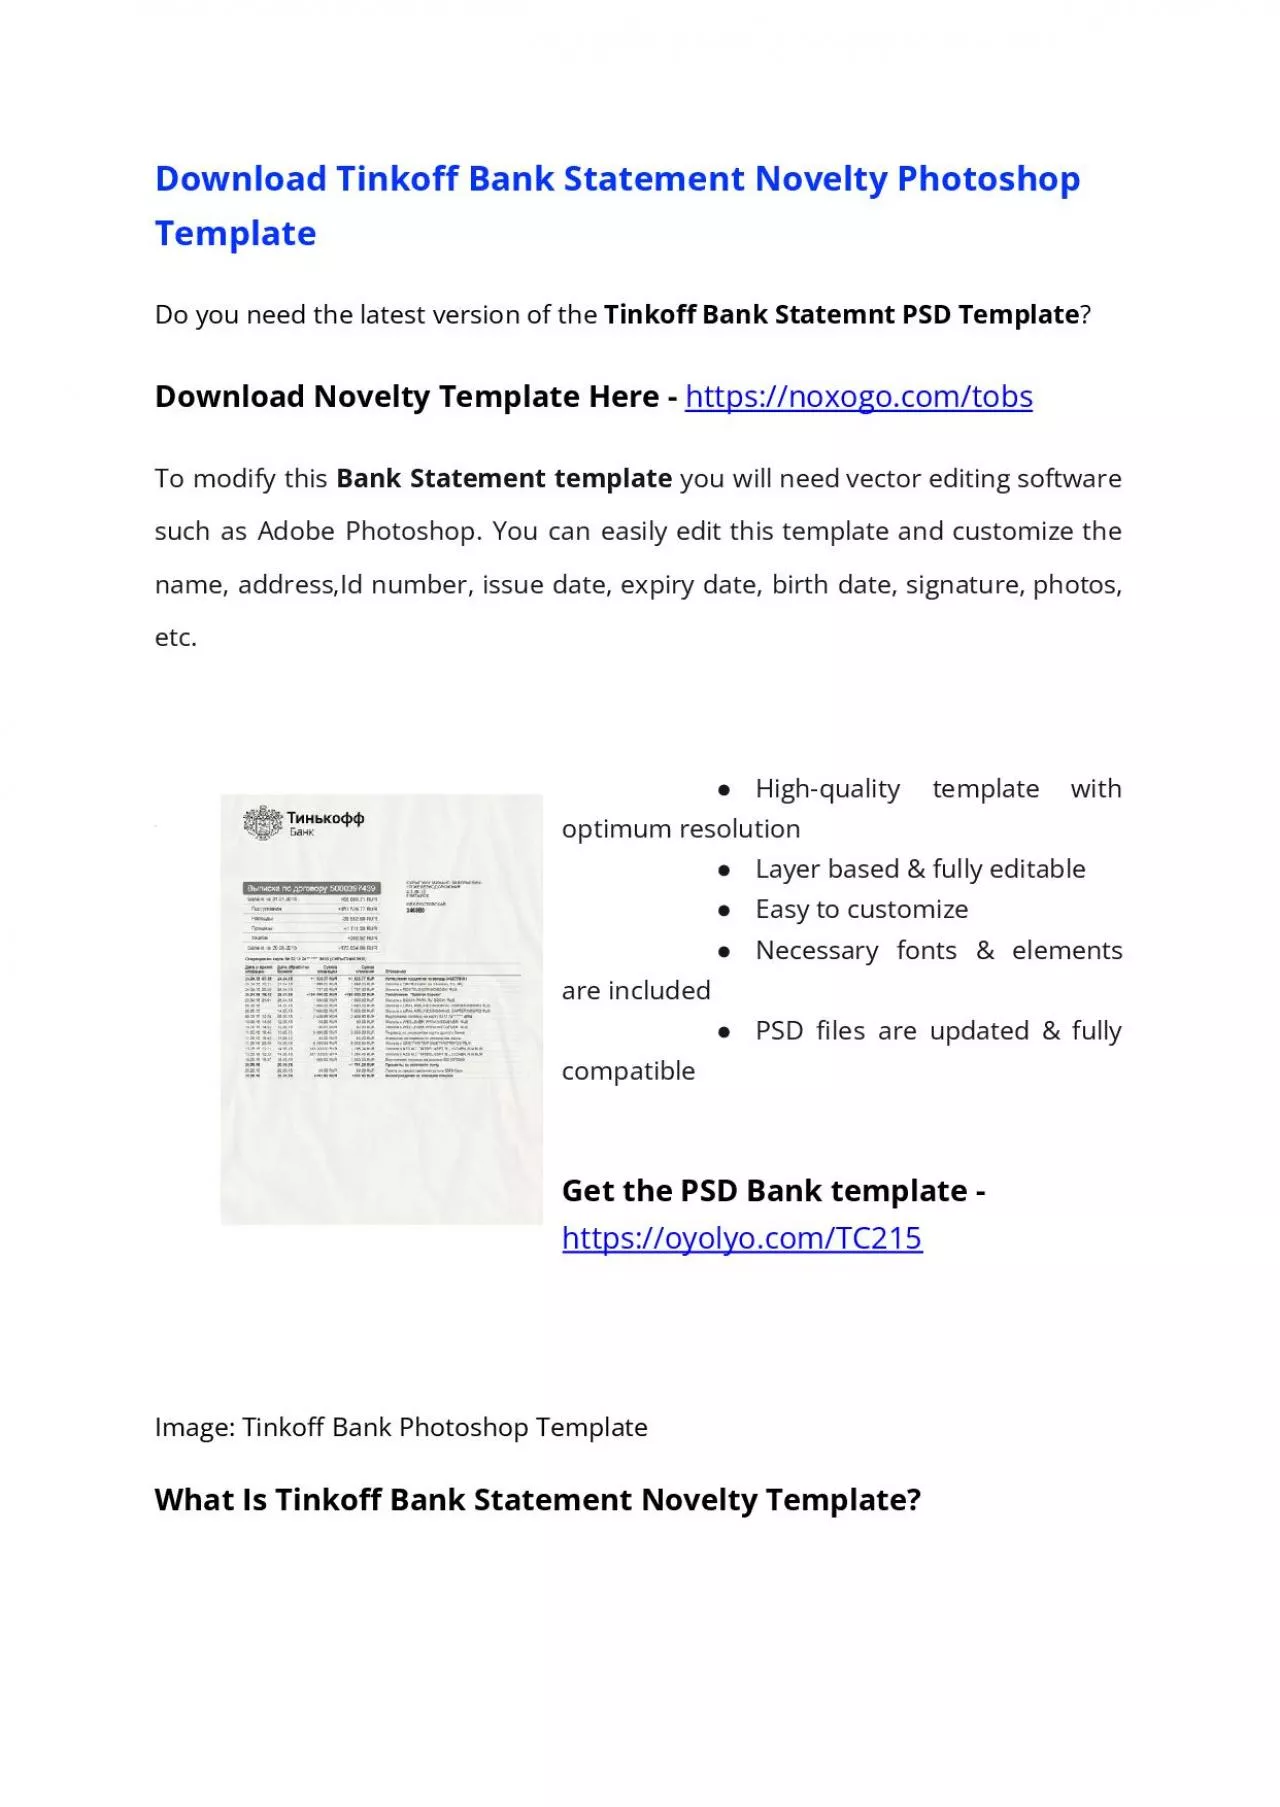 Tinkoff Bank Statement PSD Template – Download Photoshop File